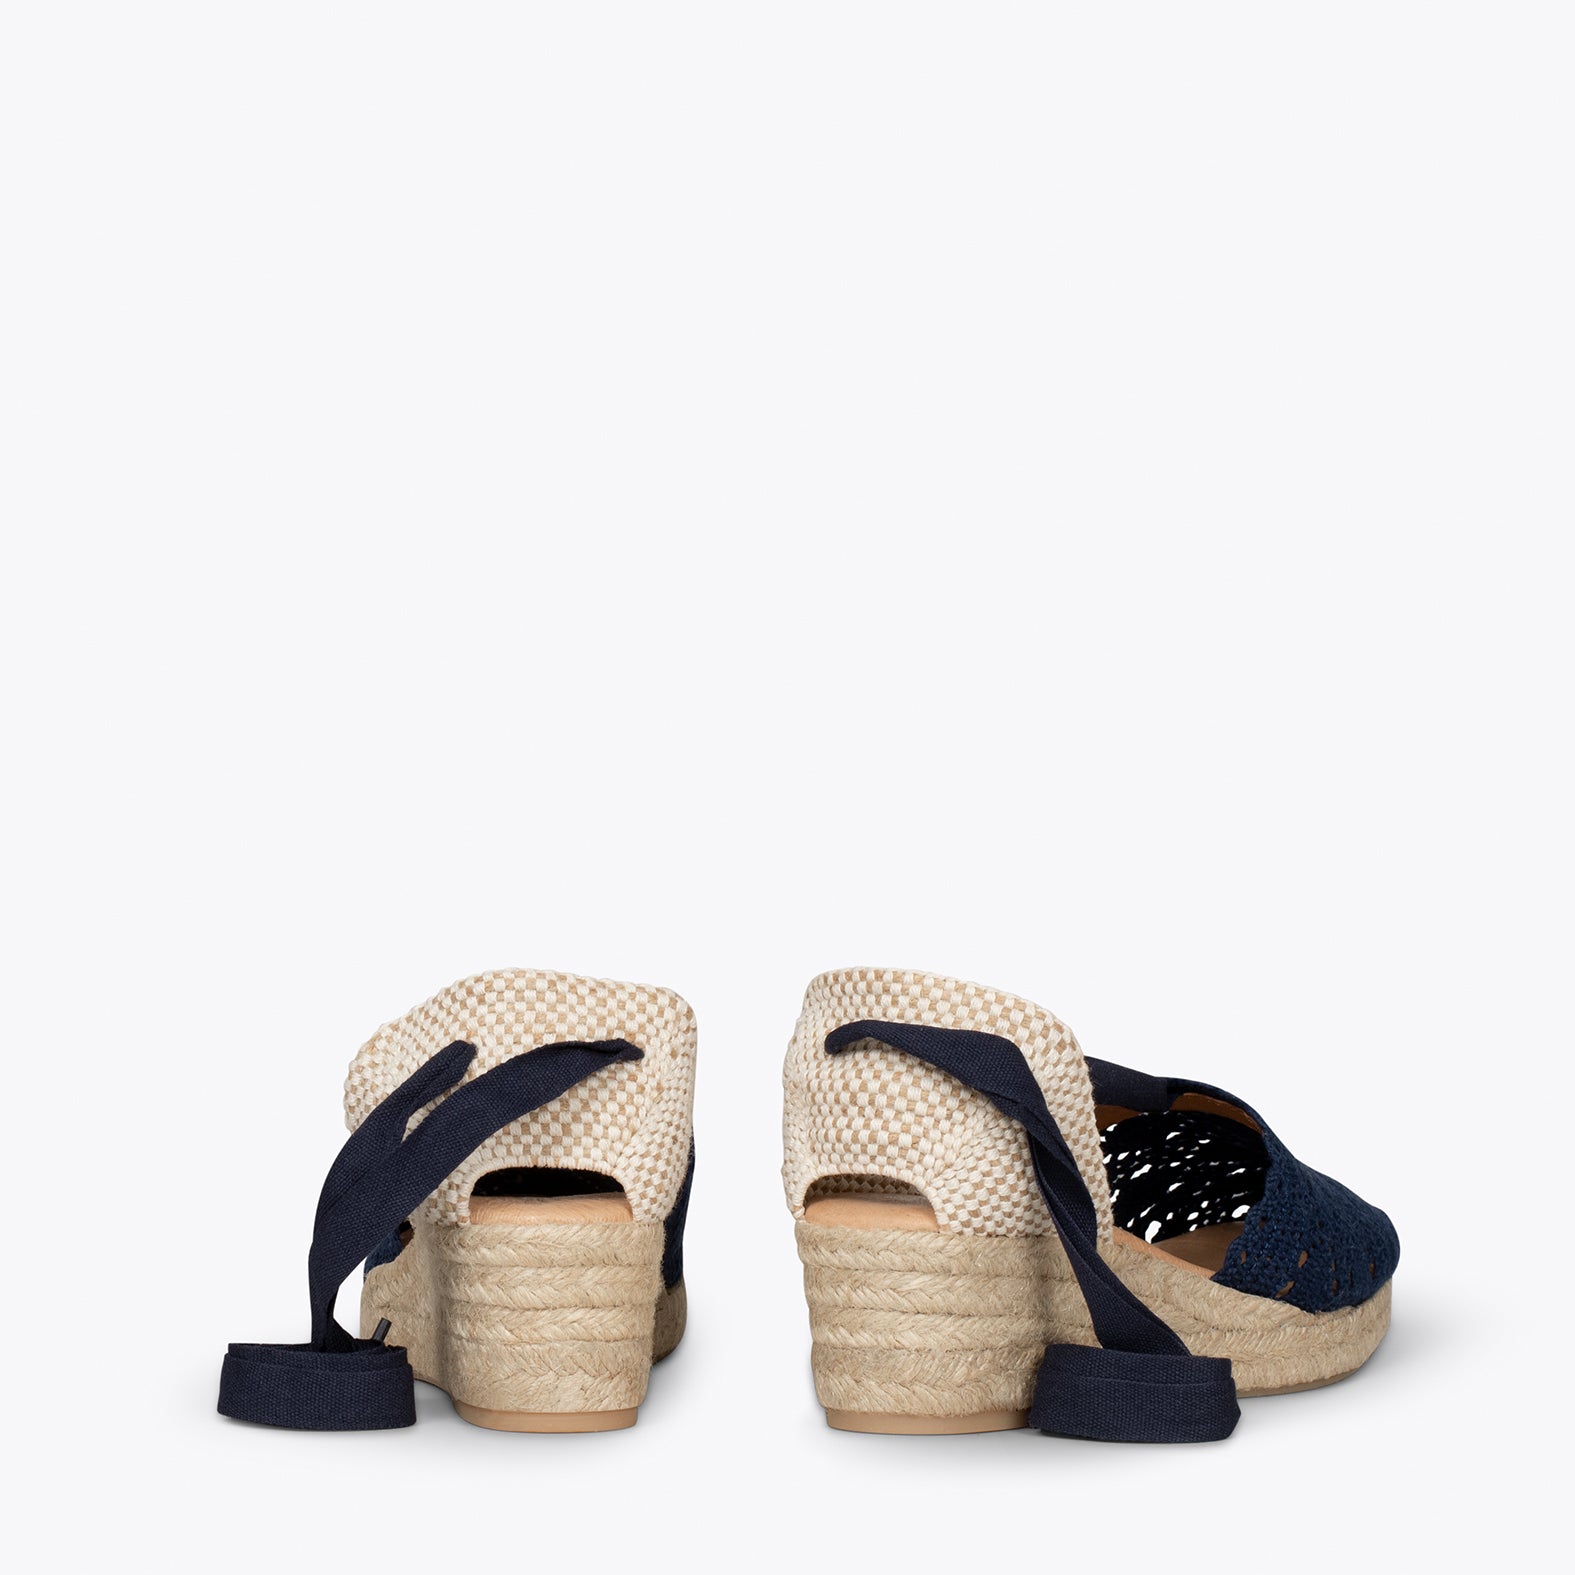 DEIÀ – NAVY crocheted espadrilles with laces